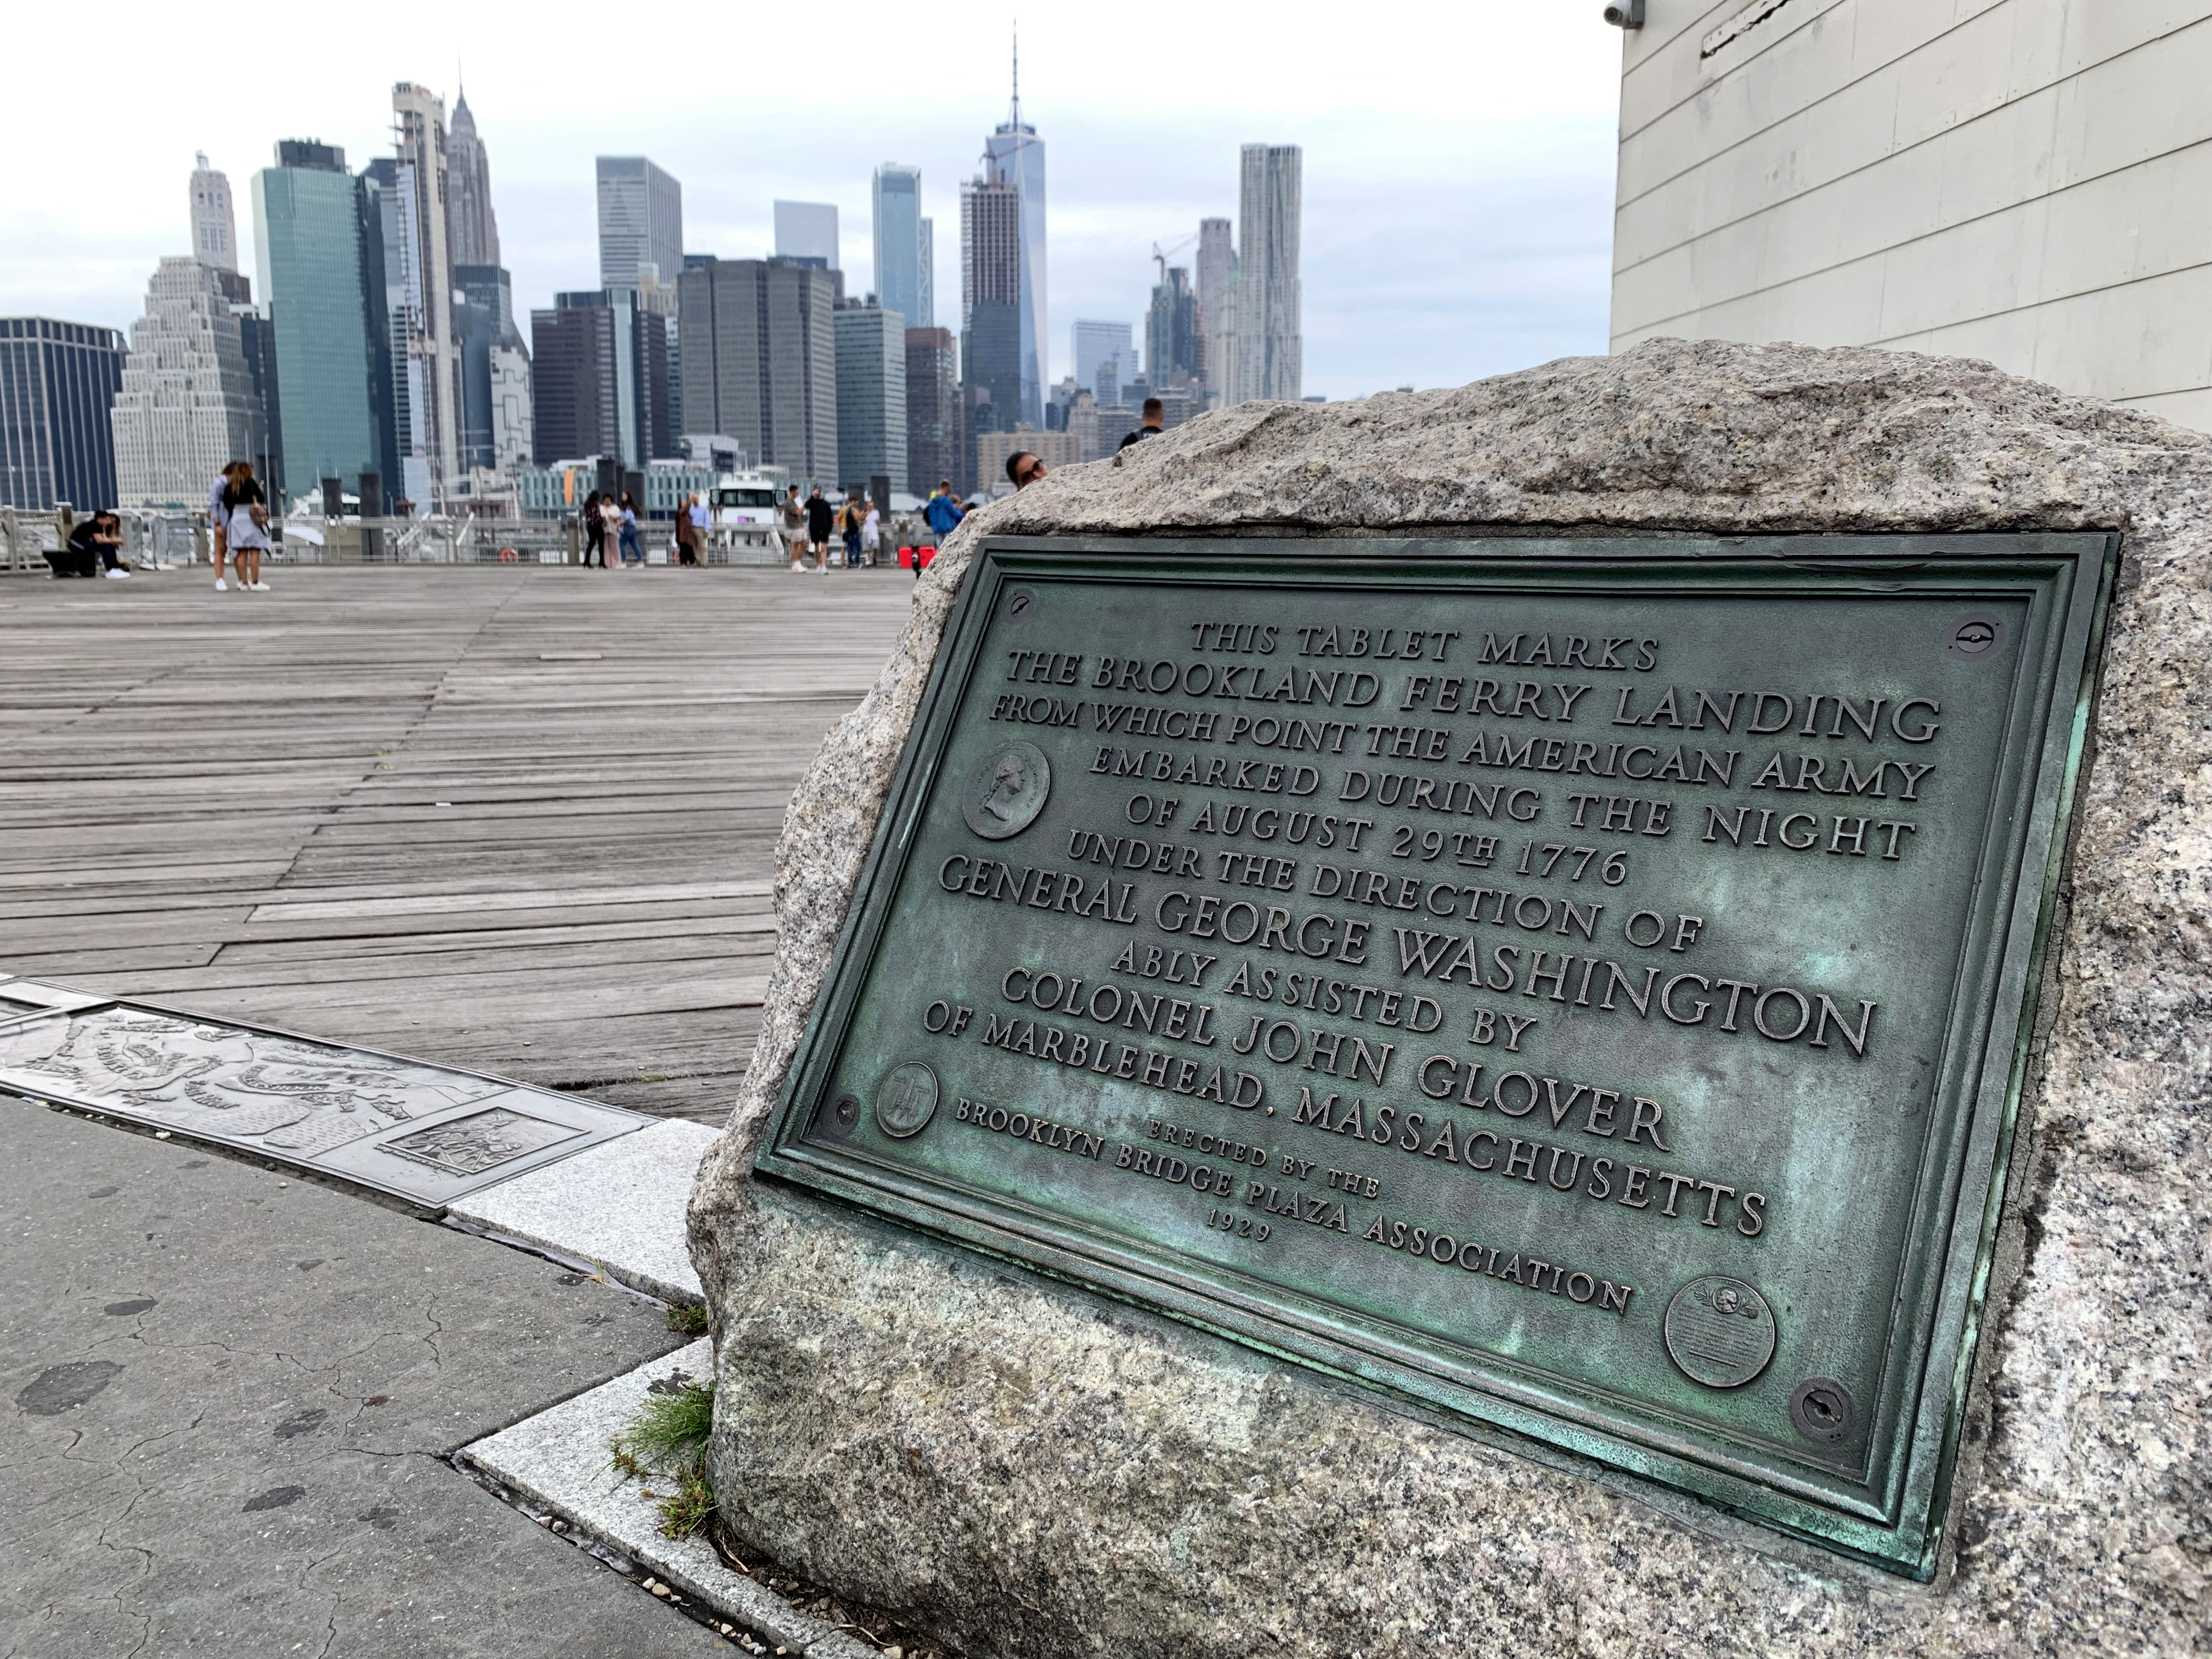 This plaque at Fulton Ferry Landing, now part of Brooklyn Bridge Park, marks the spot where the American army embarked during the night of August 29, 1776 under the direction of Gen. George Washington to escape from the British, leaving the troops intact to fight again another day. Eagle photo by Mary Frost